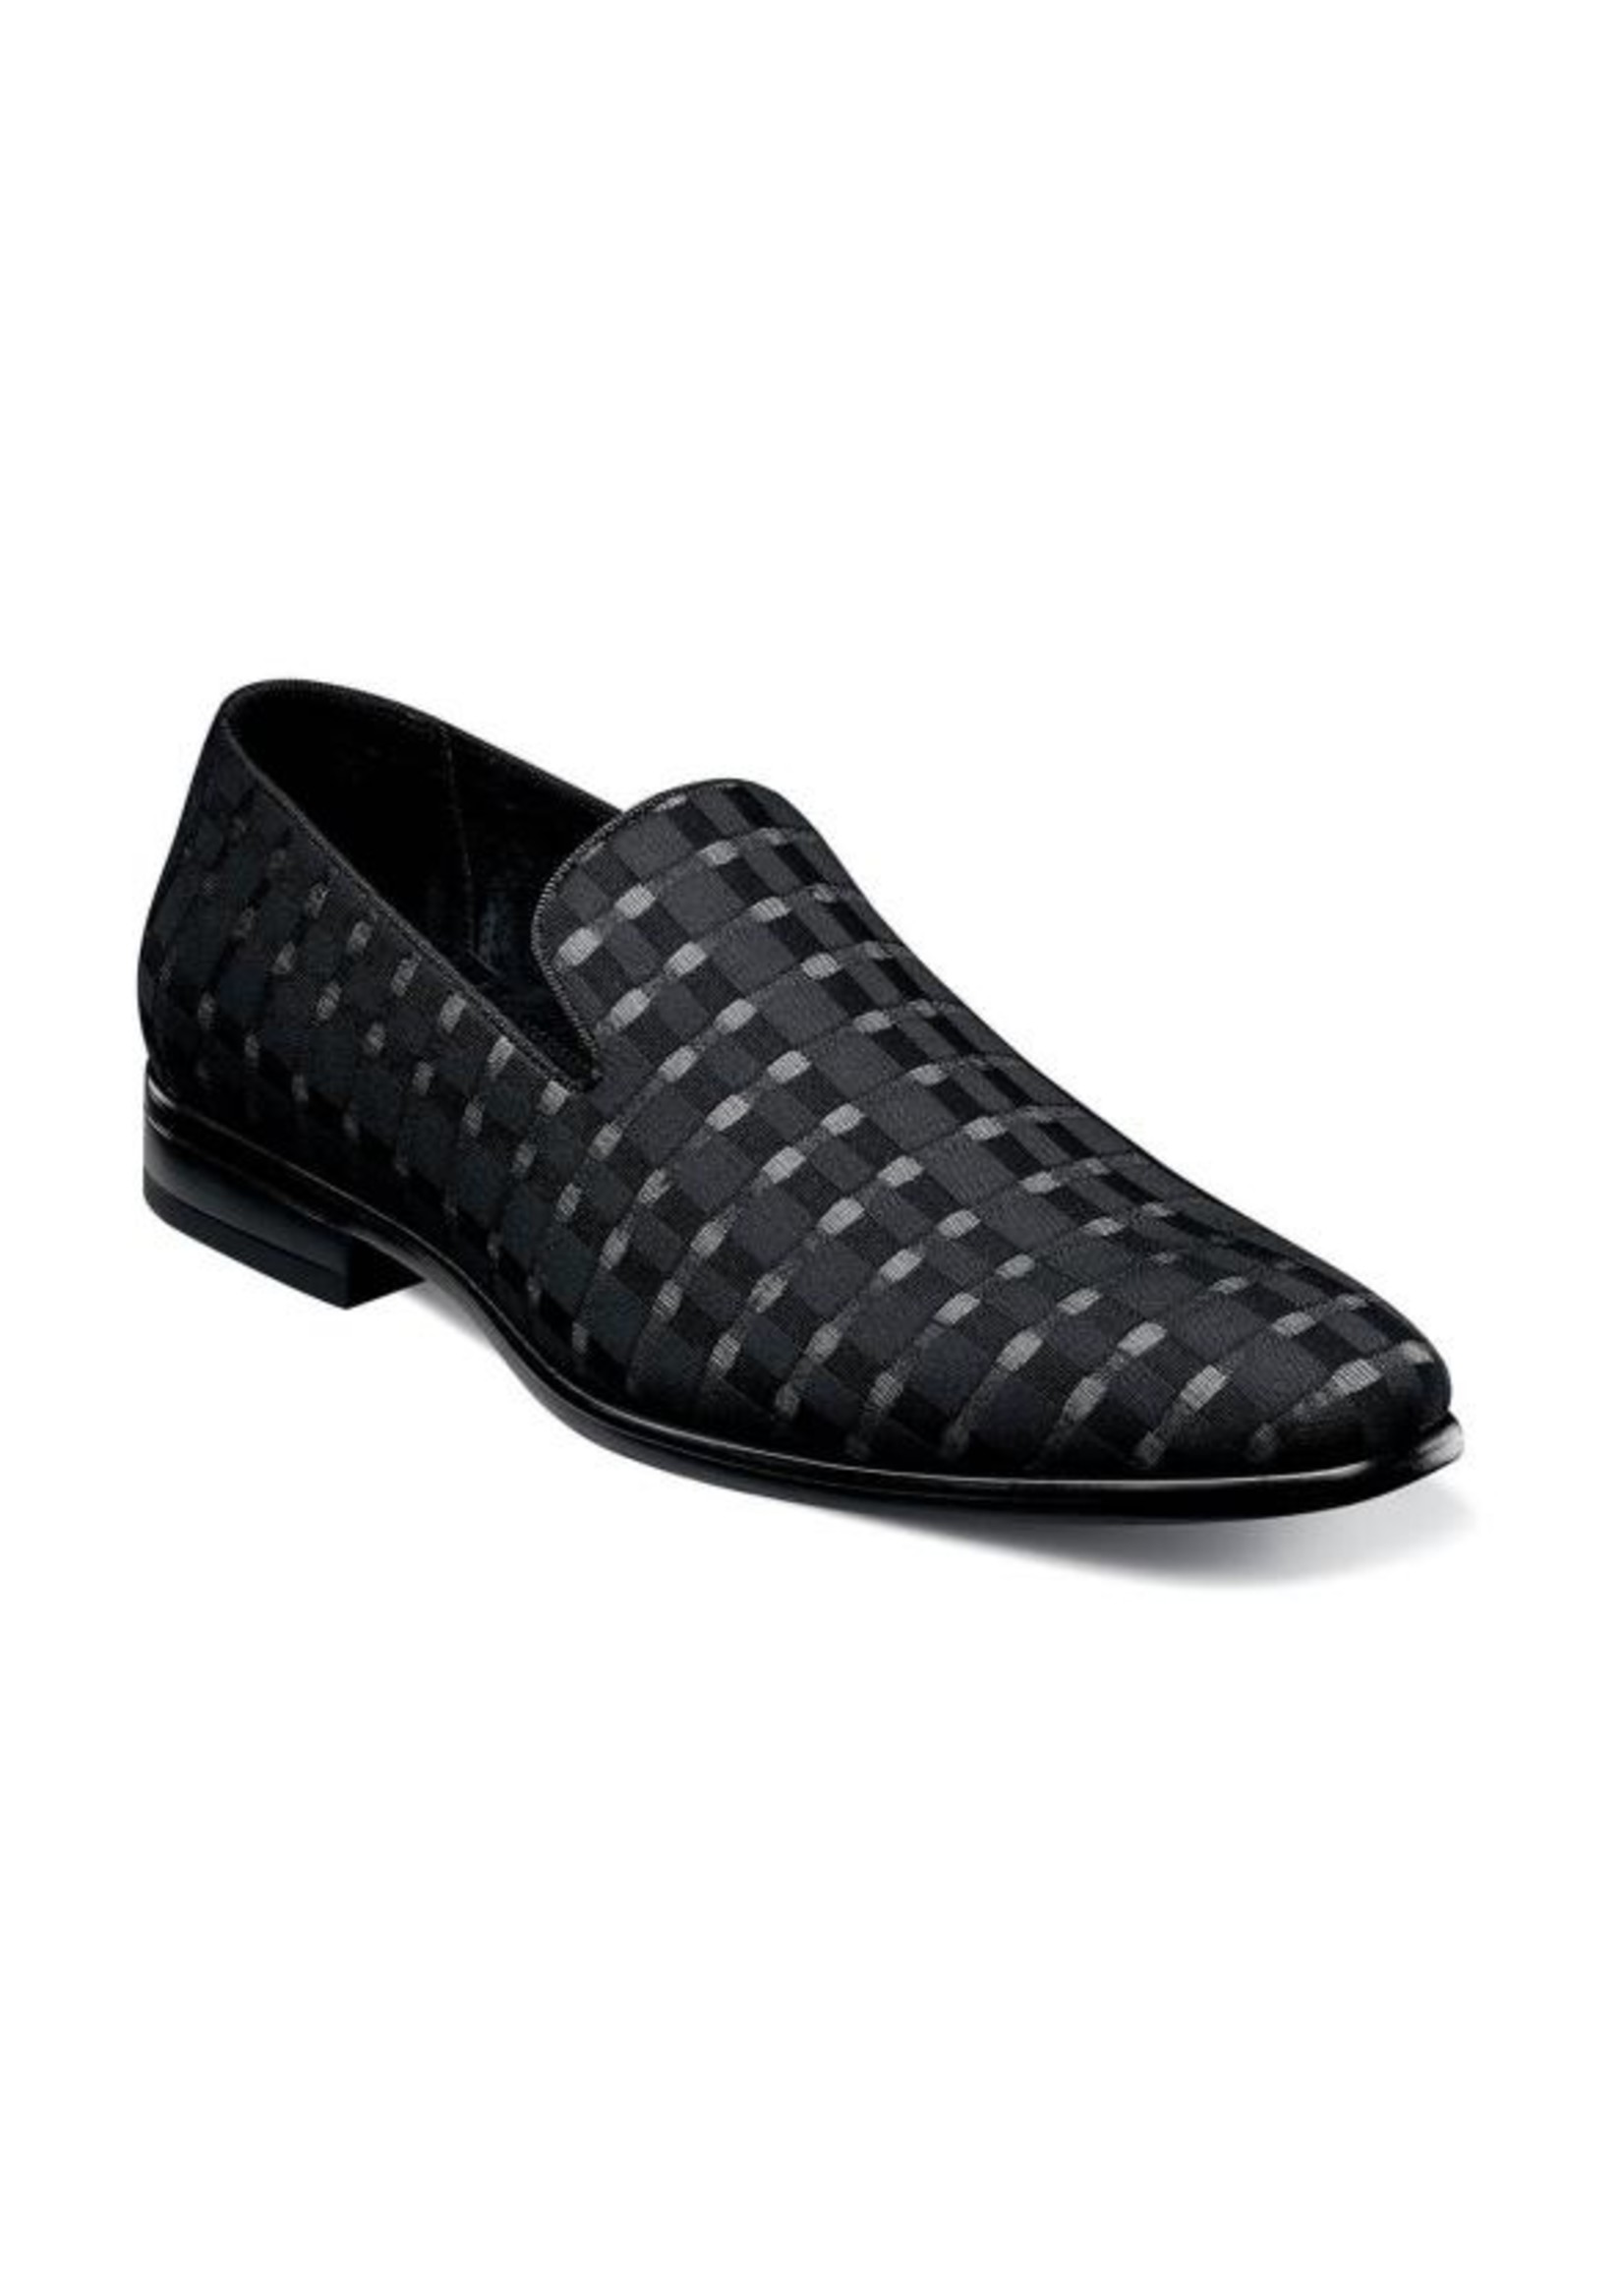 stacy adams loafers